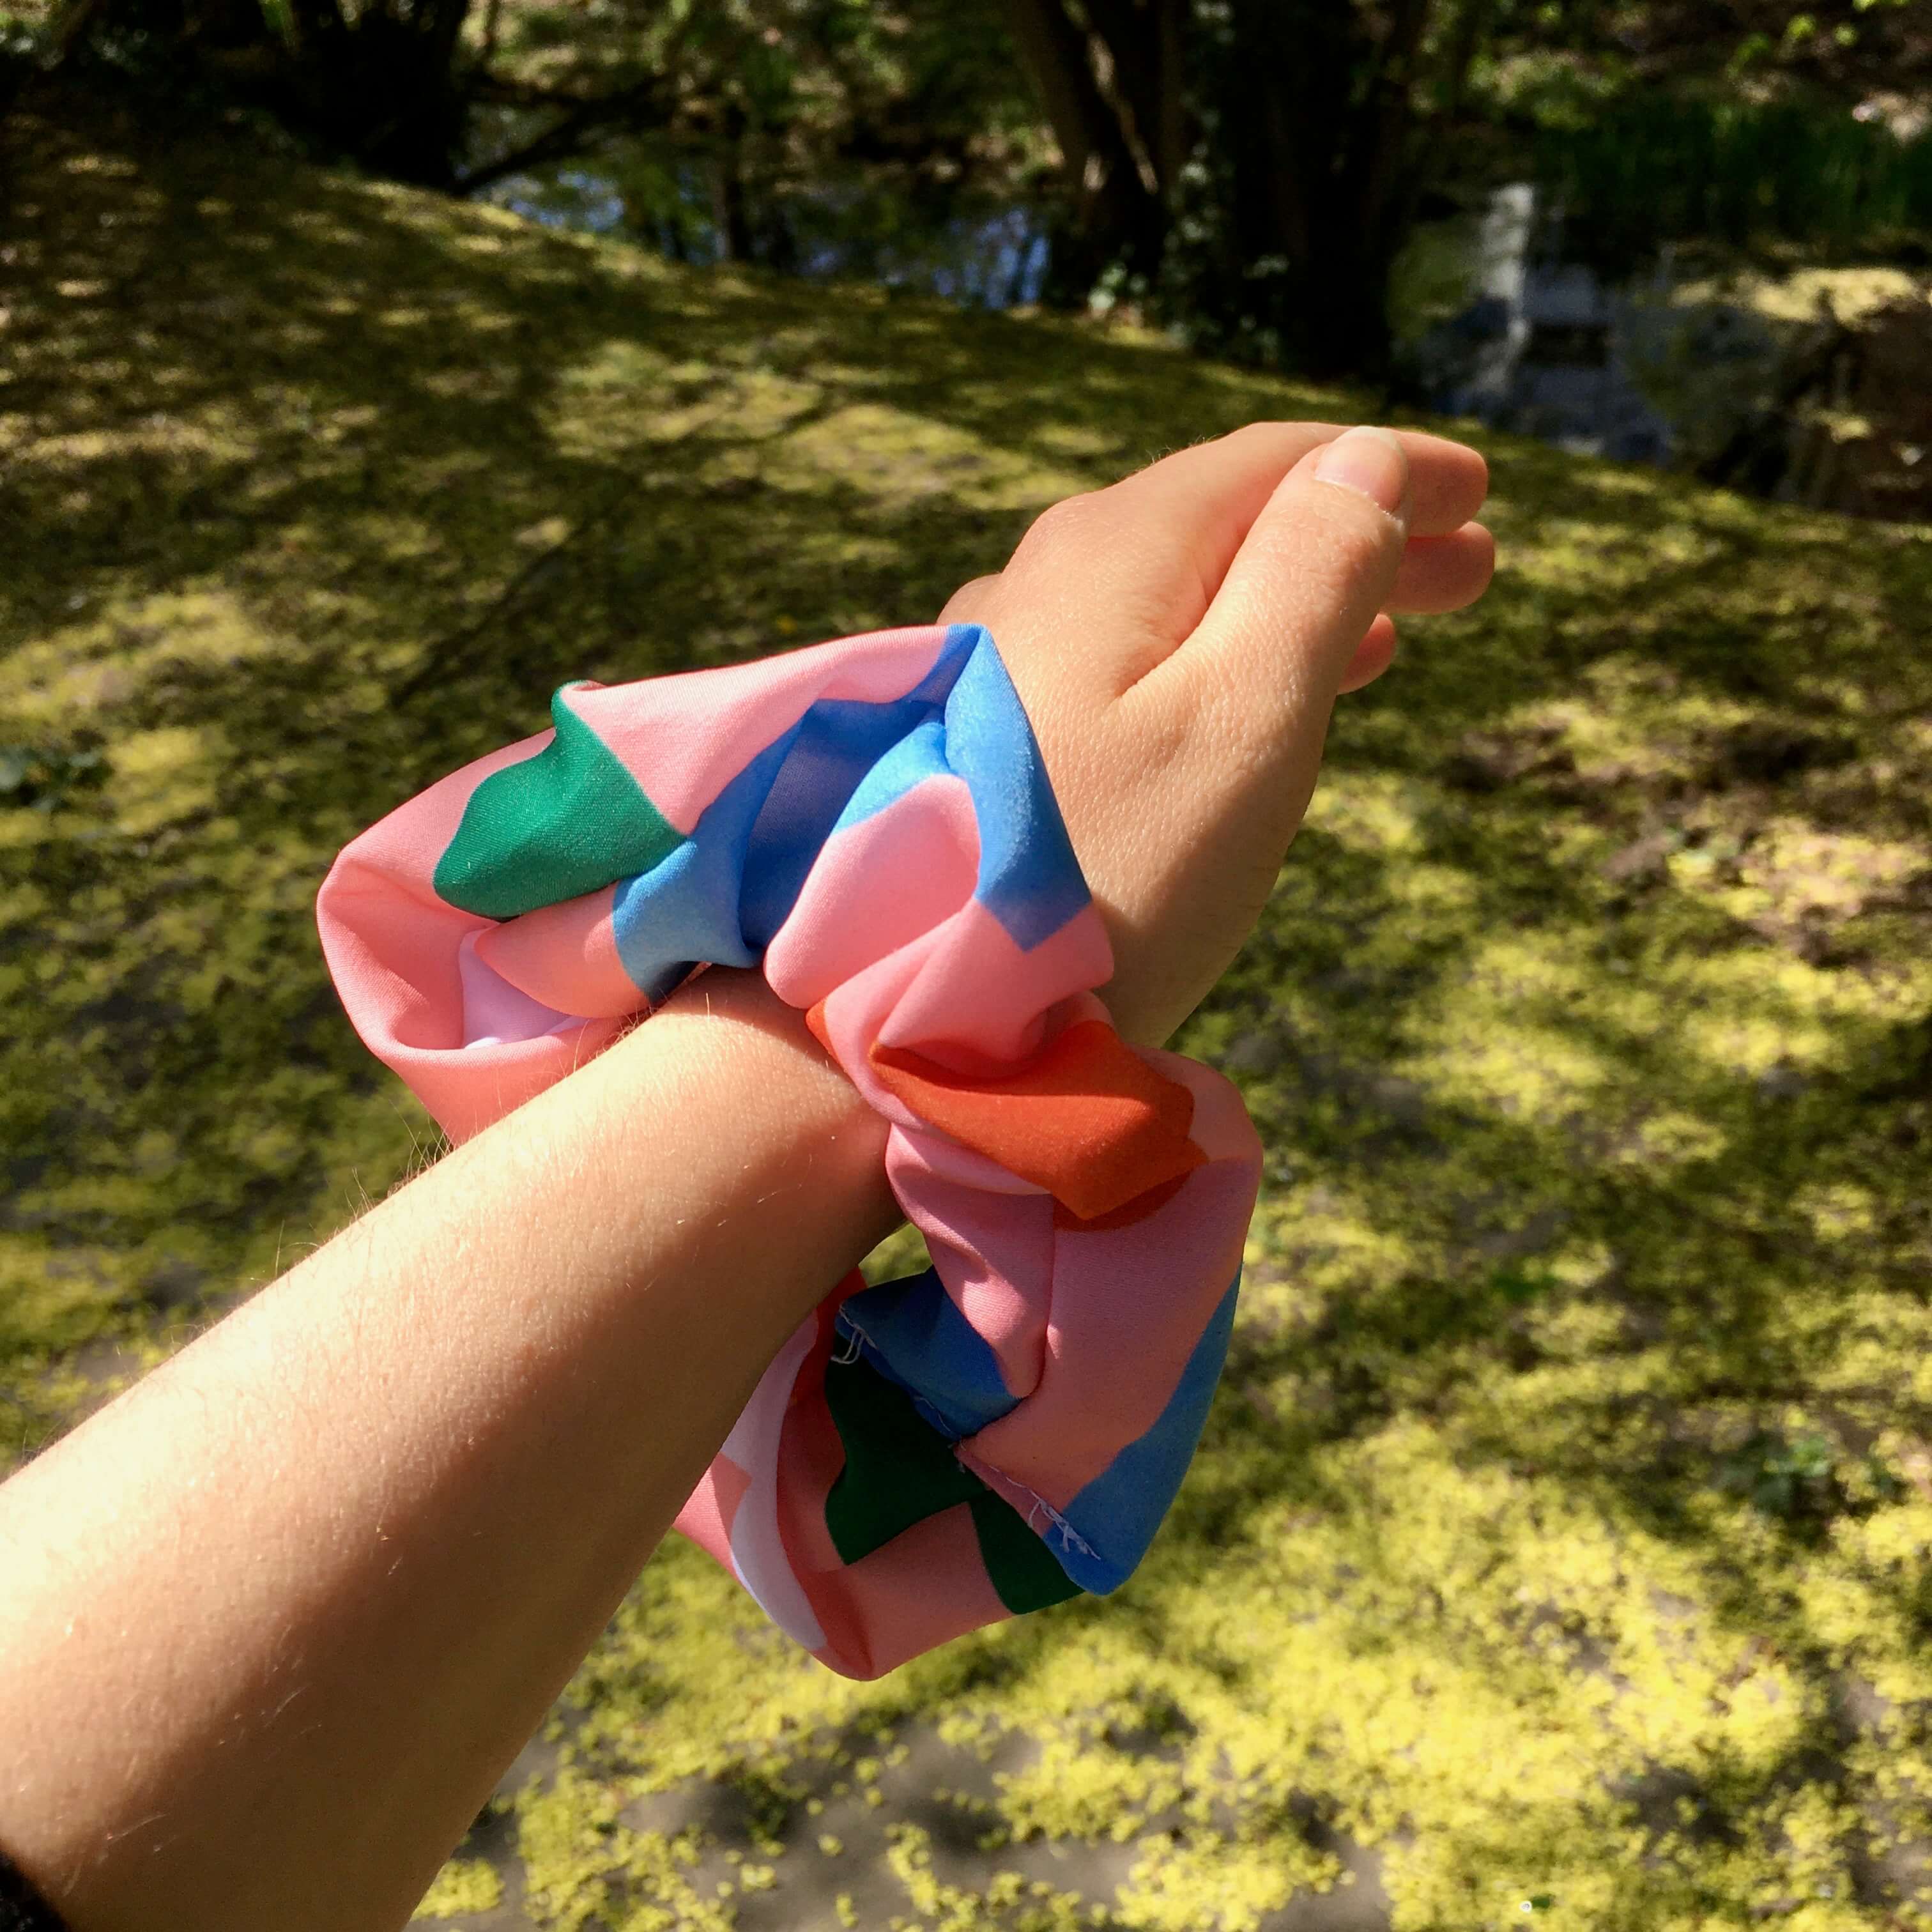 Hair scrunchie used from waste 'Flowerbed' fabric